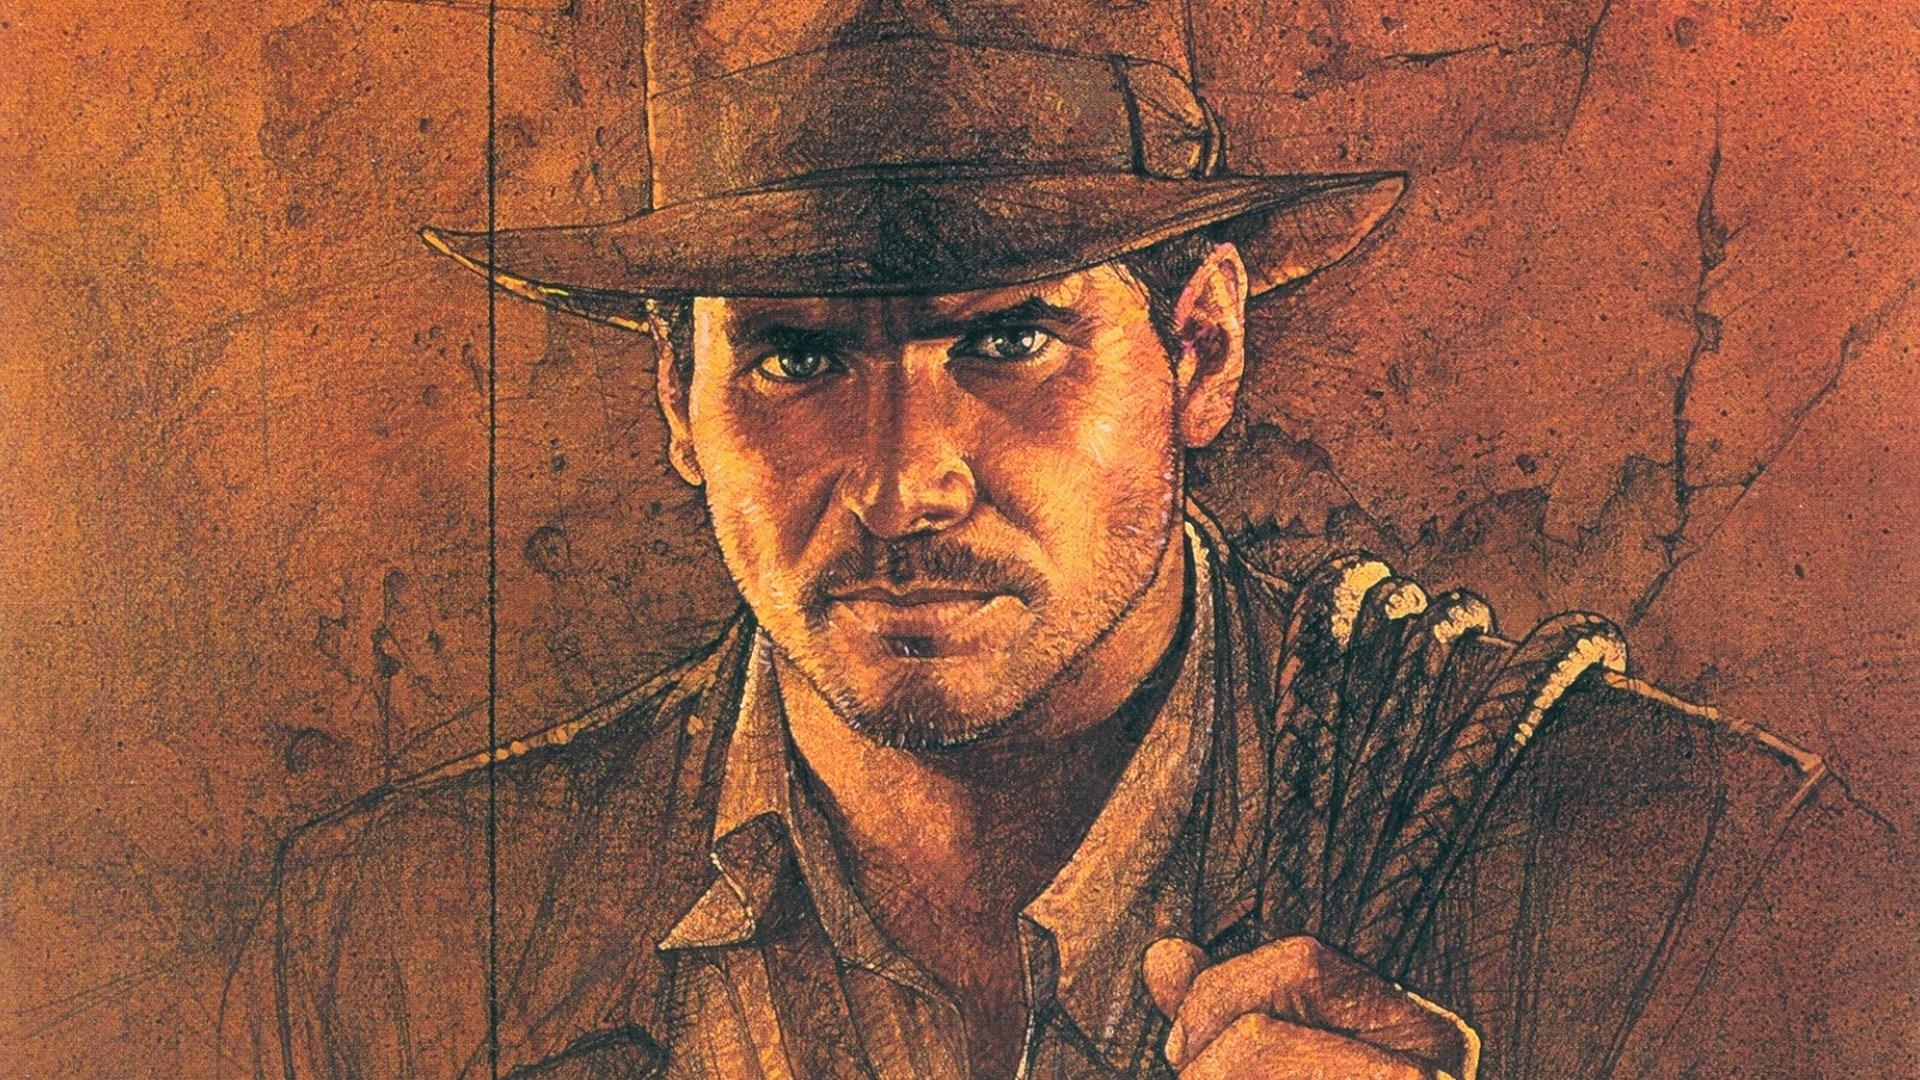 Raiders of the Lost Ark HD Wallpaper Background Image